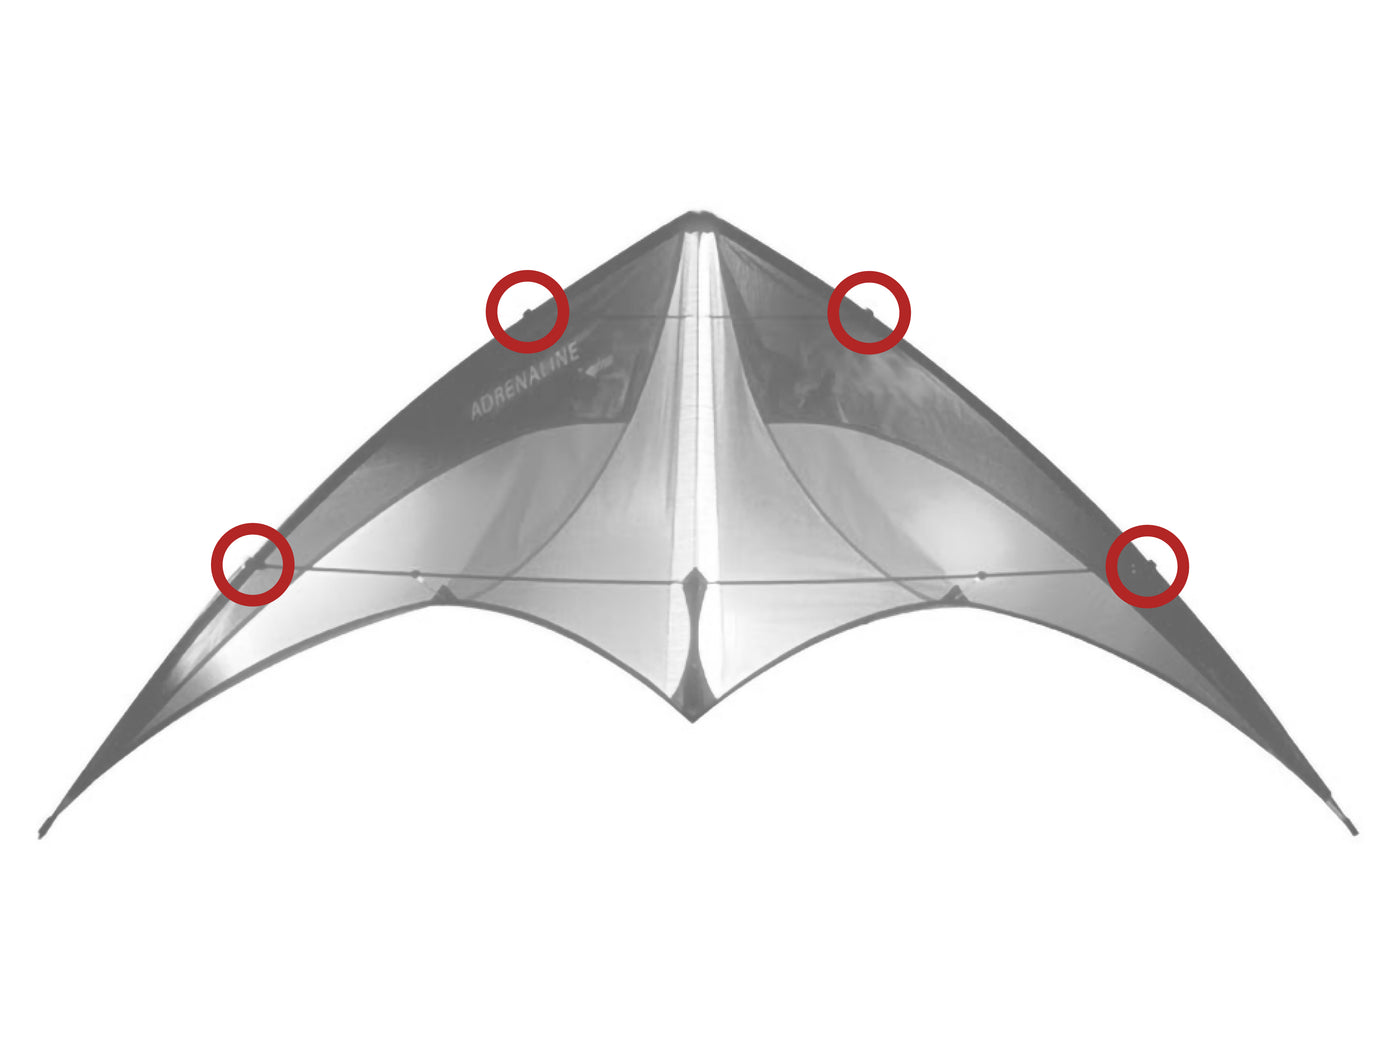 Diagram showing location of the Adrenaline Leading Edge Fittings on the kite.